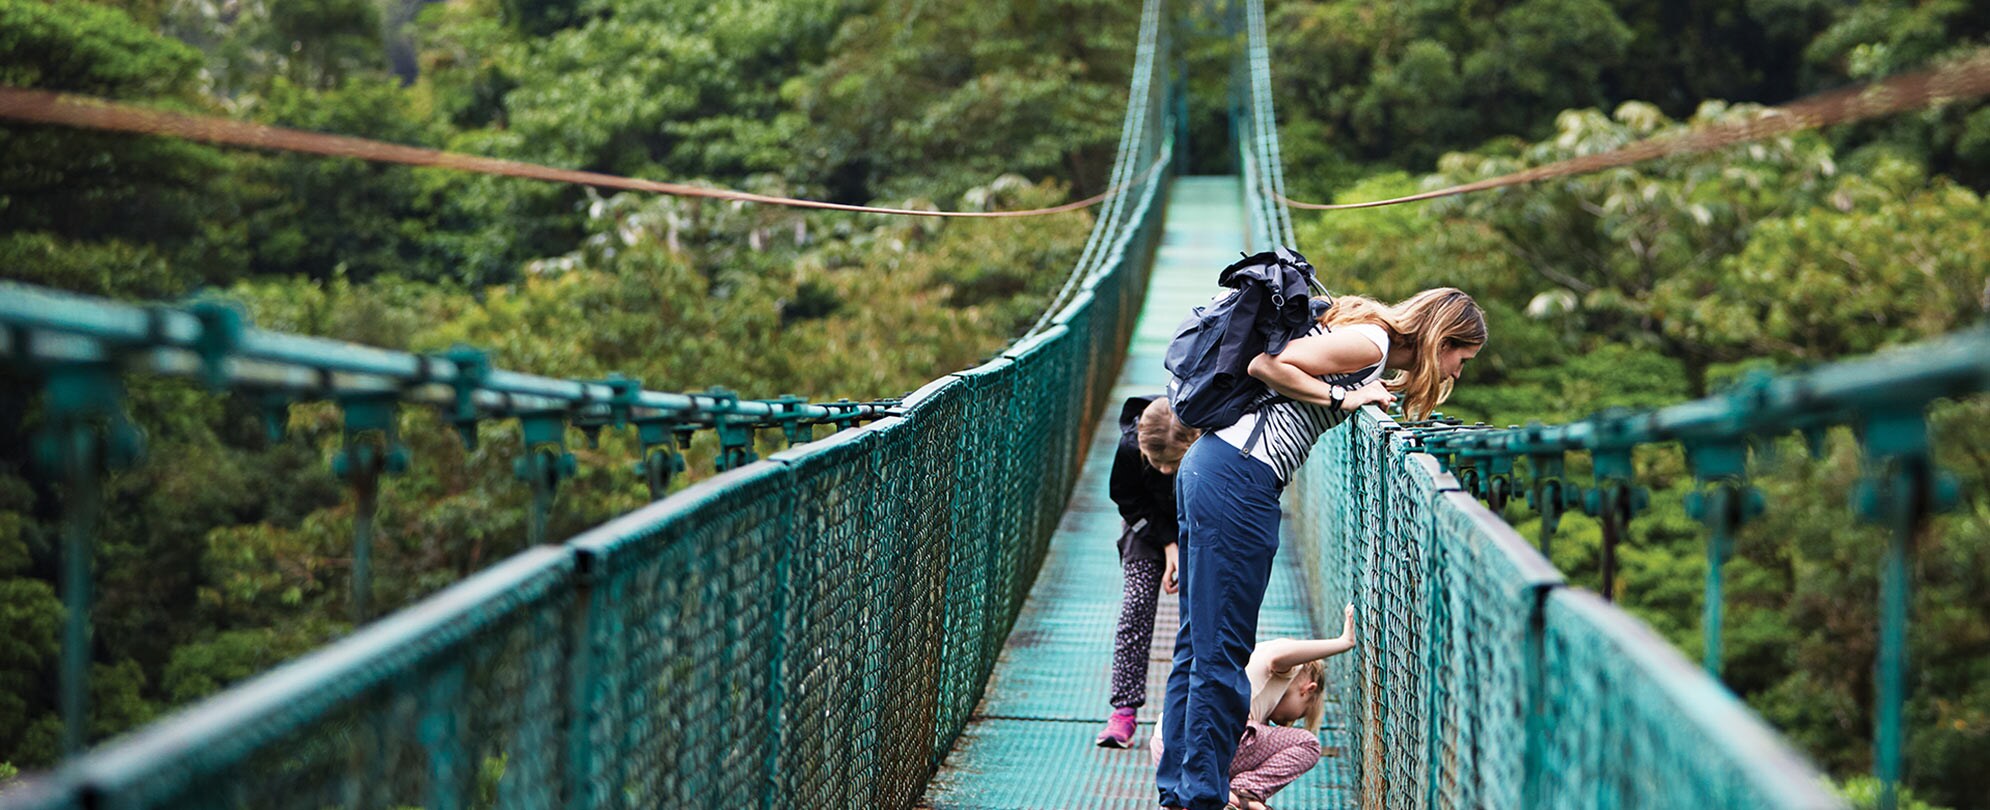 Woman and two kids looking off the side of a suspended bridge in the jungle during a tour of Costa Rica.